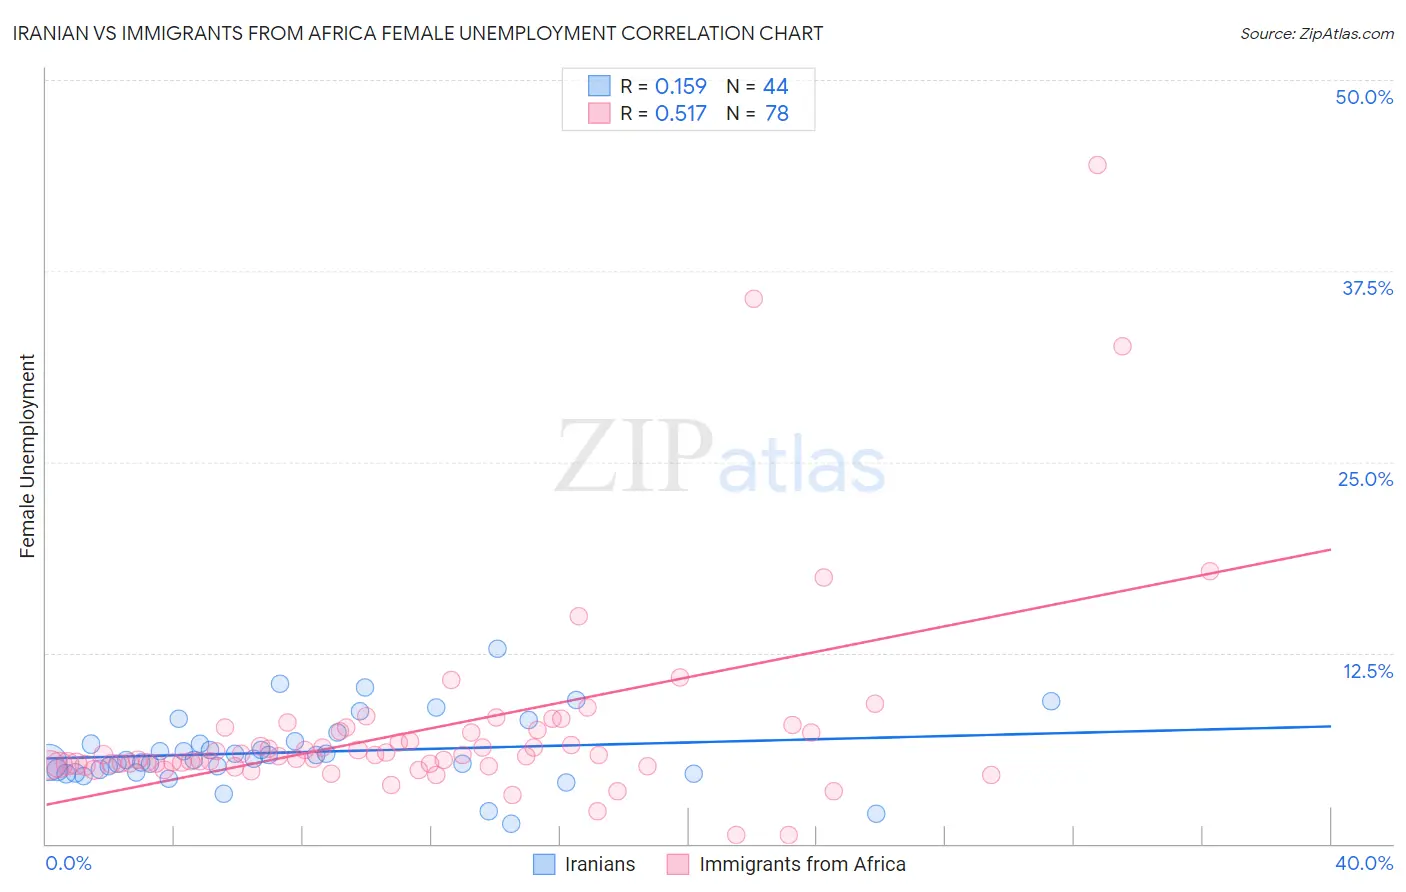 Iranian vs Immigrants from Africa Female Unemployment